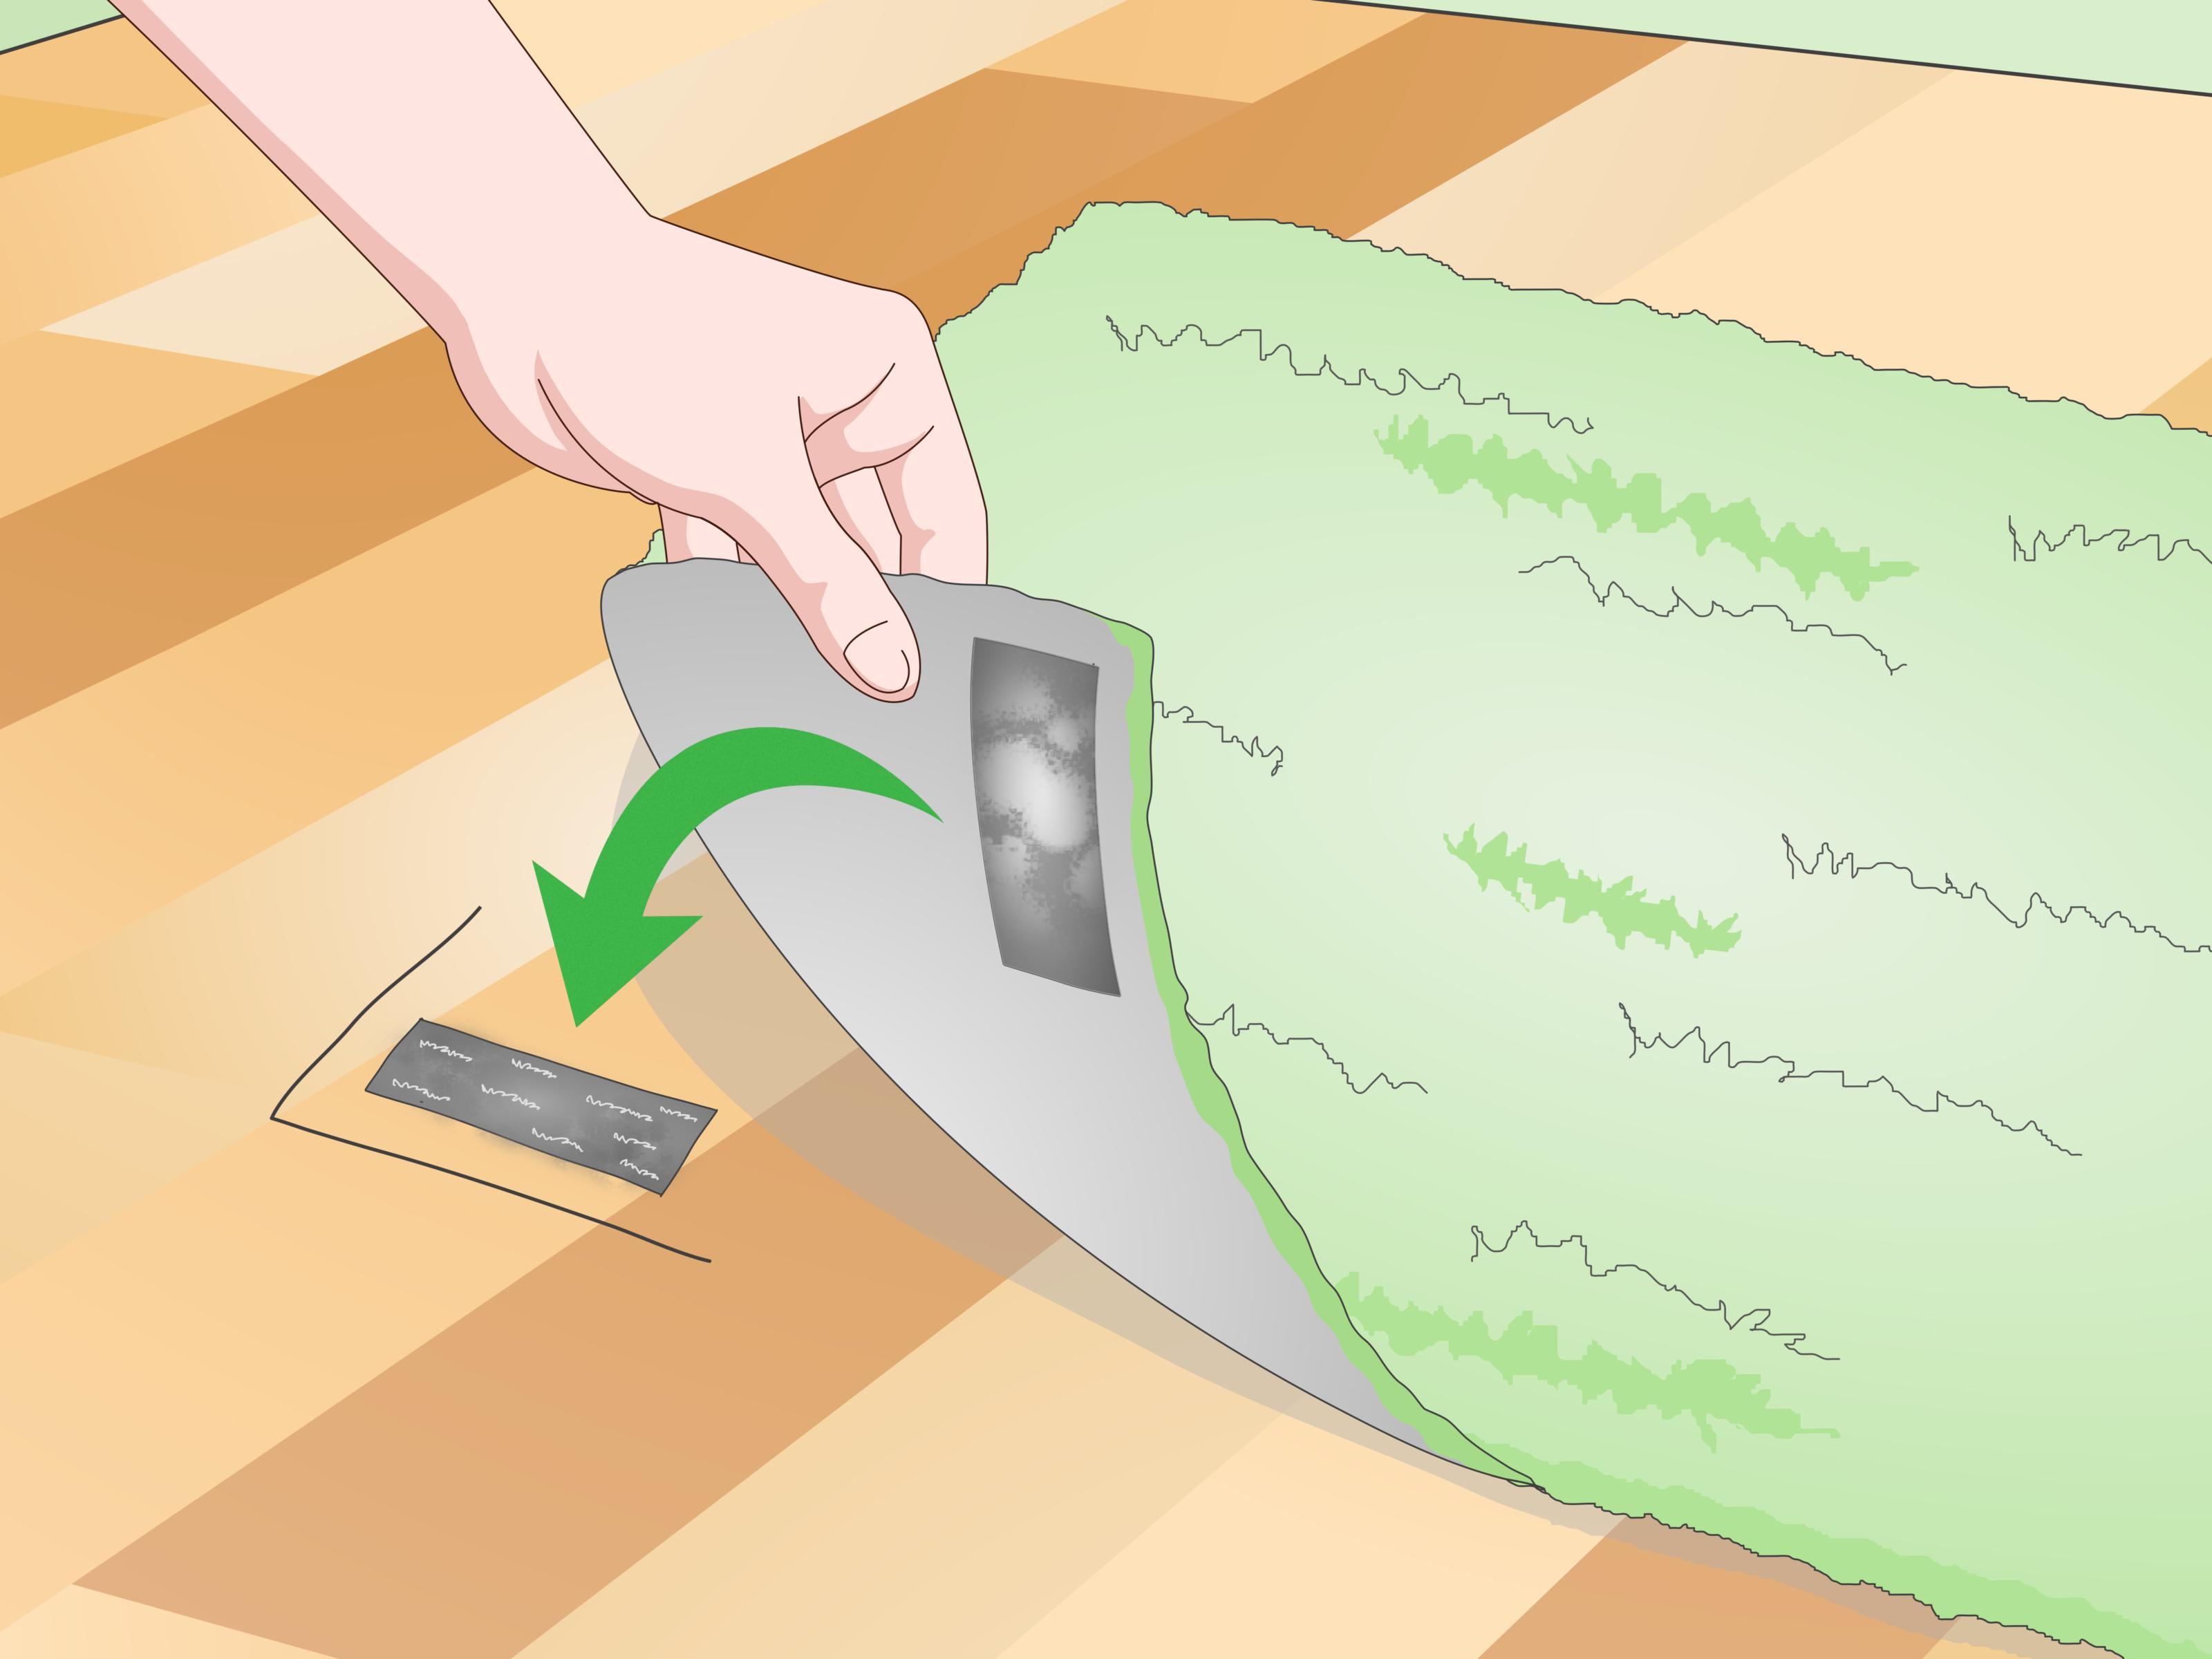 Hardwood Floors and area Rugs Of 3 Ways to Stop A Rug From Moving On A Wooden Floor Wikihow Intended for Stop A Rug From Moving On A Wooden Floor Step 18